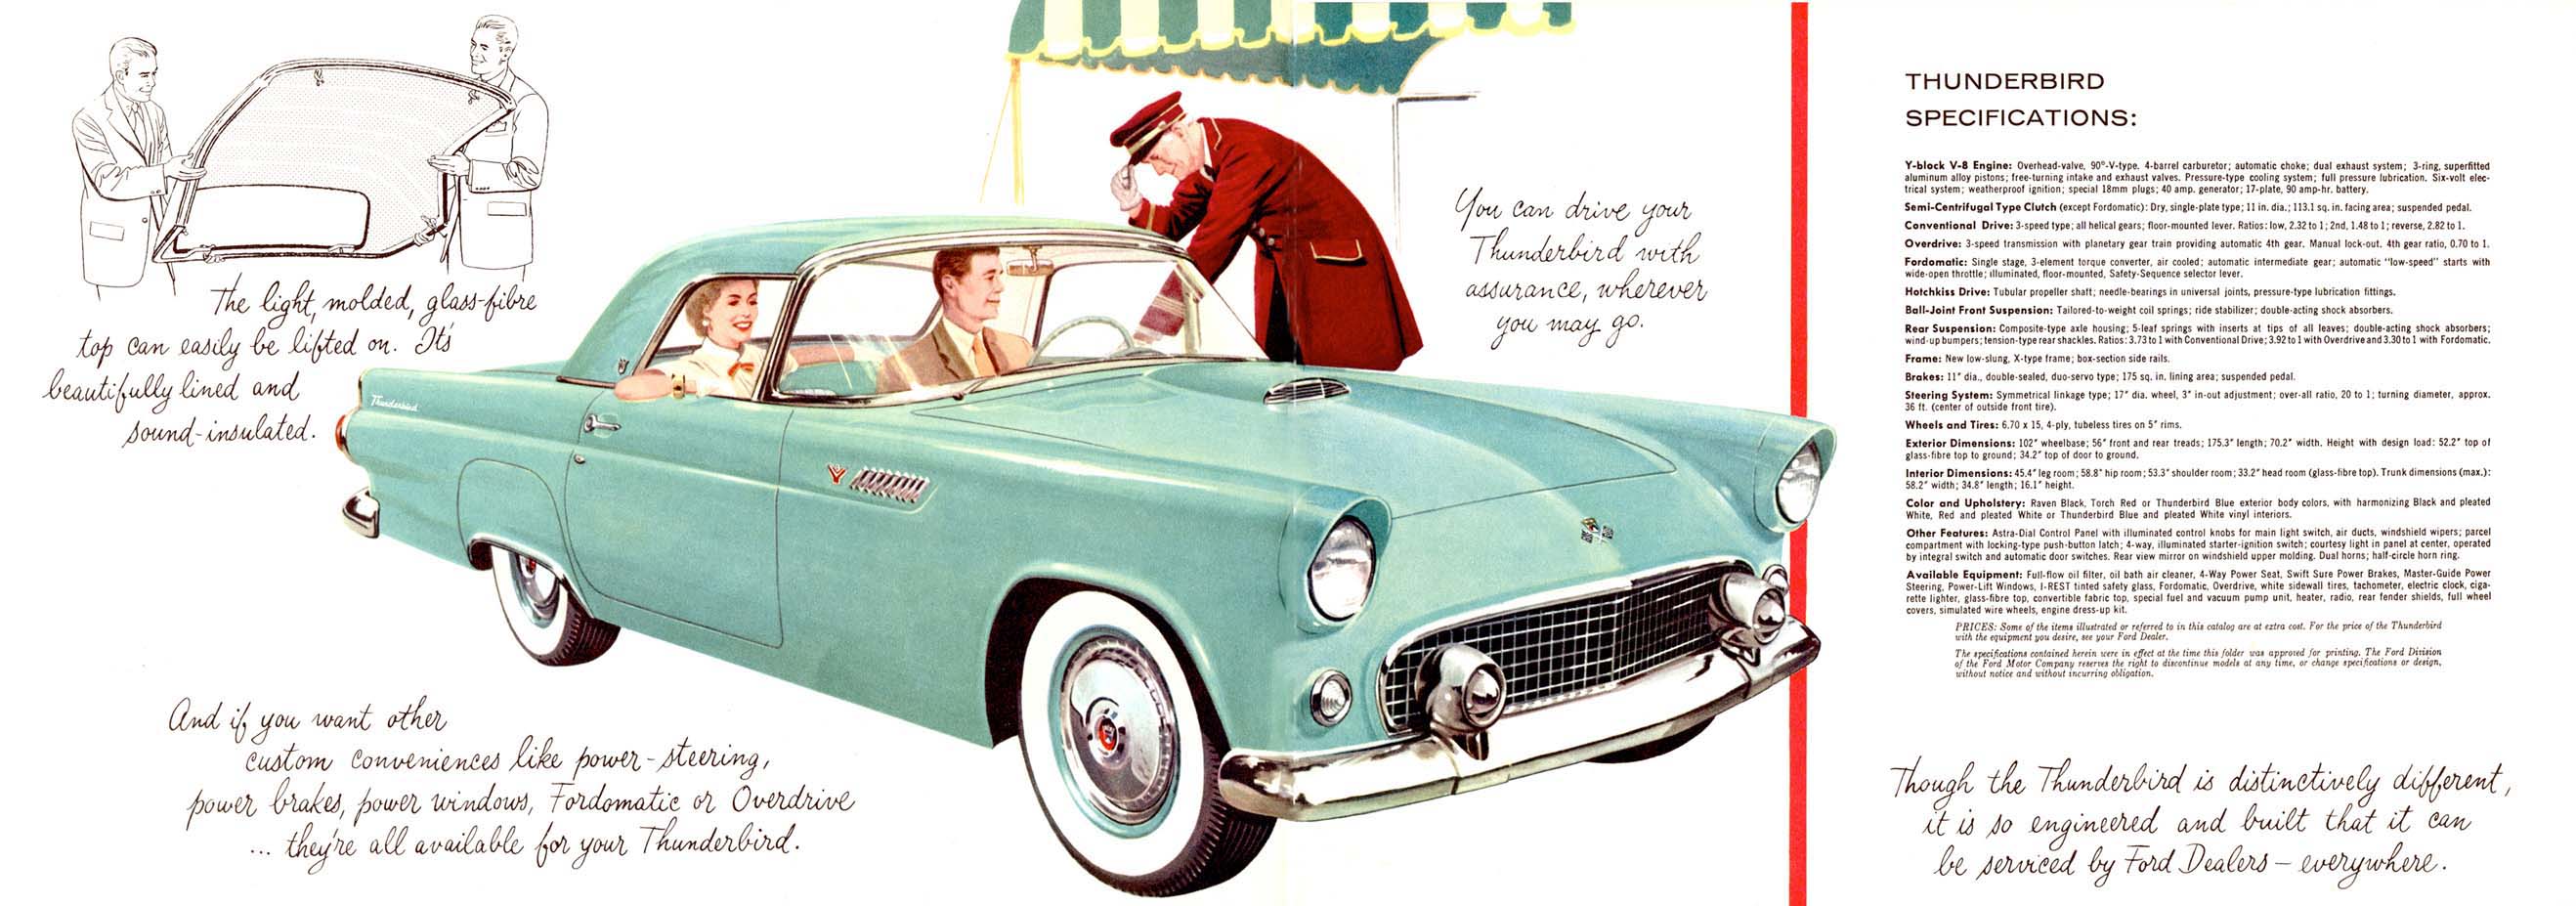 Classic Car Insurance: A Look at the First Ford Thunderbird Models  Collector Cars \u0026 Collector 